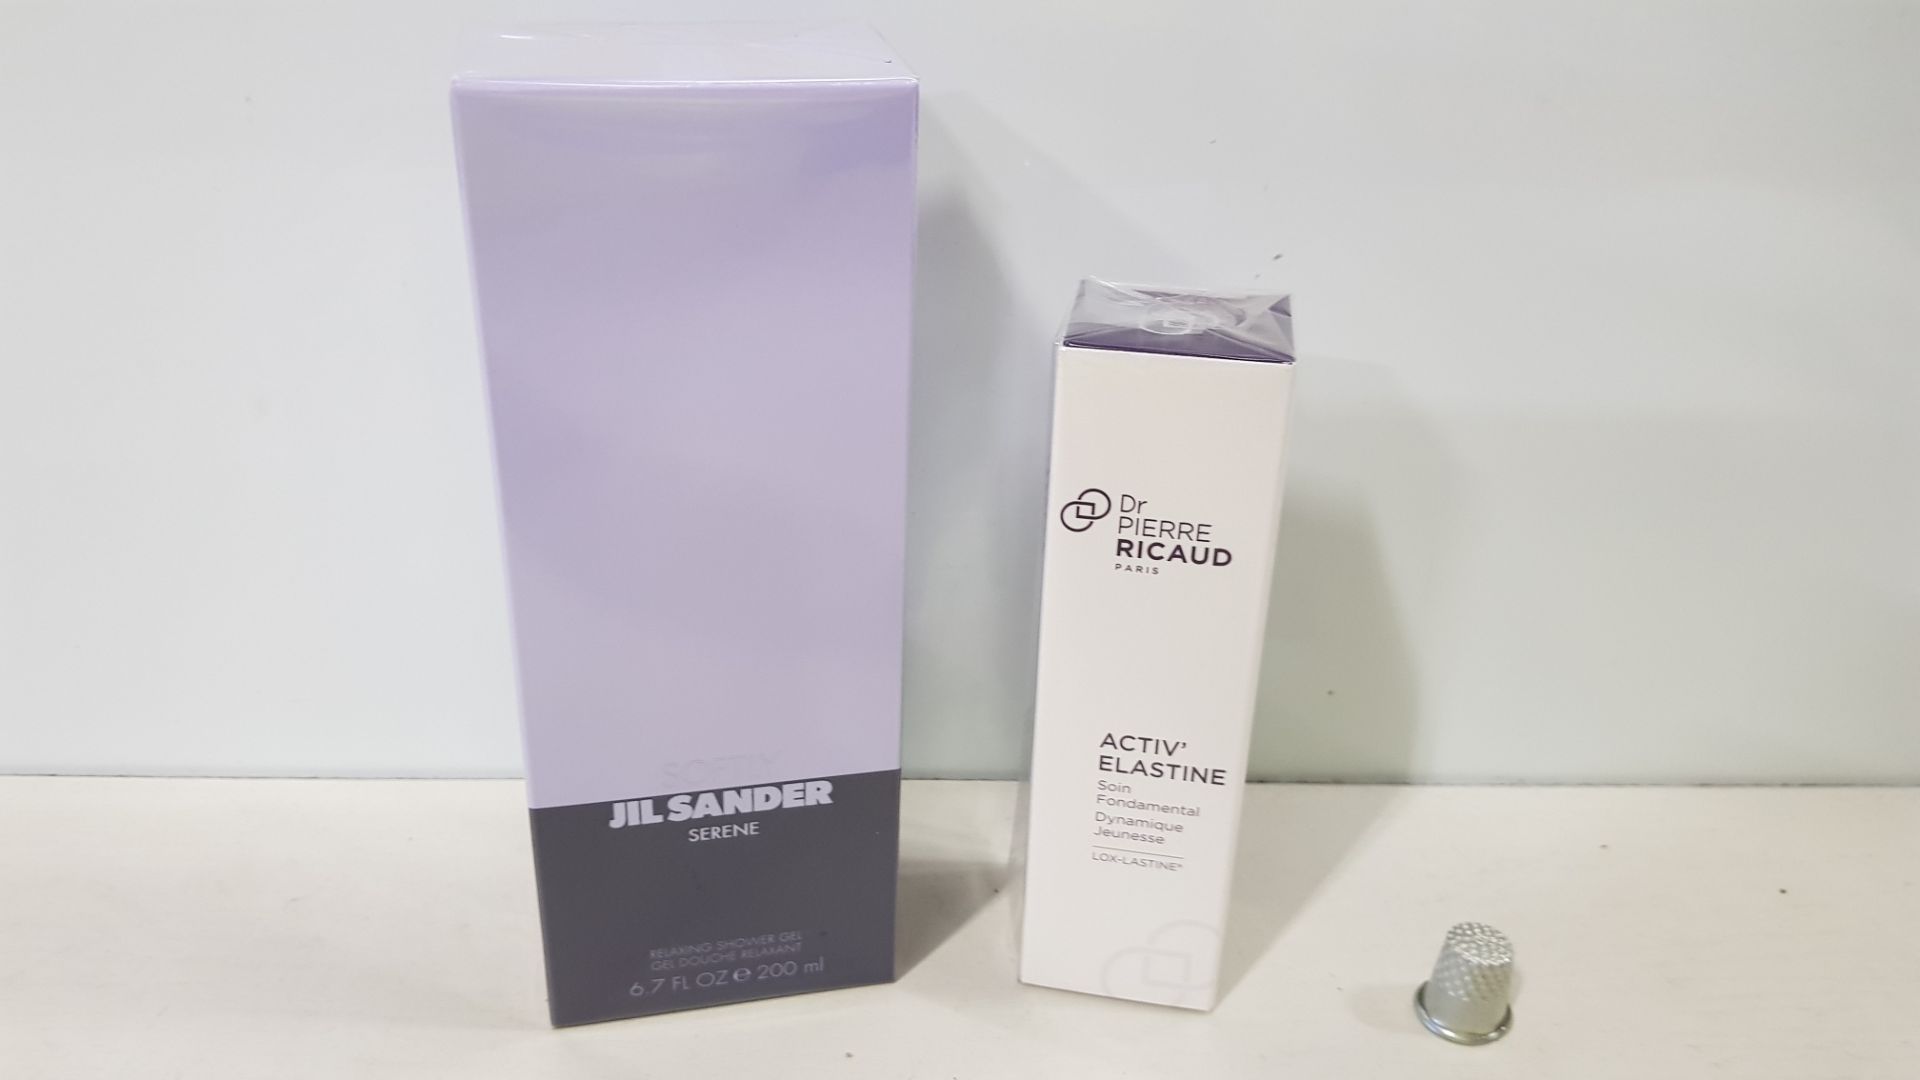 21 PIECE BRAND NEW ASSORTED LOT CONTAINING 20 X SOFTLY JIL SANDER SERENE RELAXING SHOWER GEL (200ML)